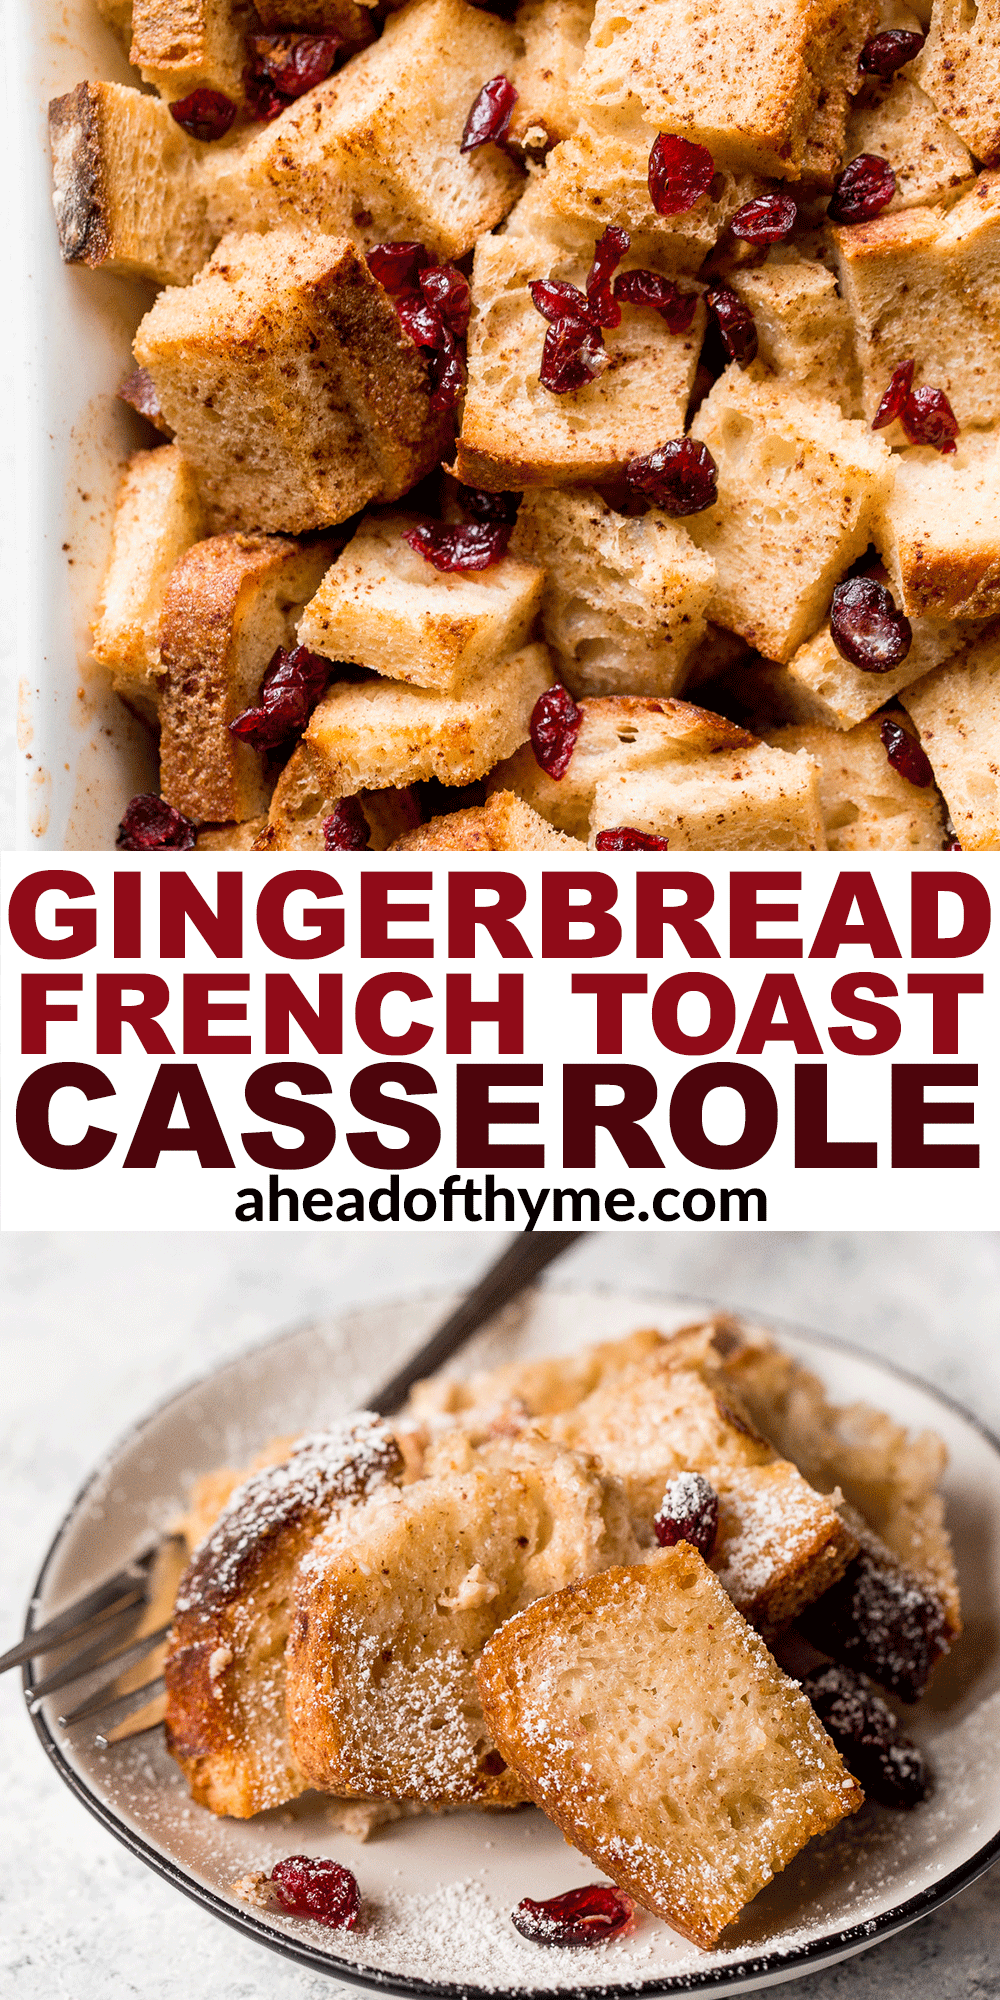 Baked Gingerbread French Toast Casserole